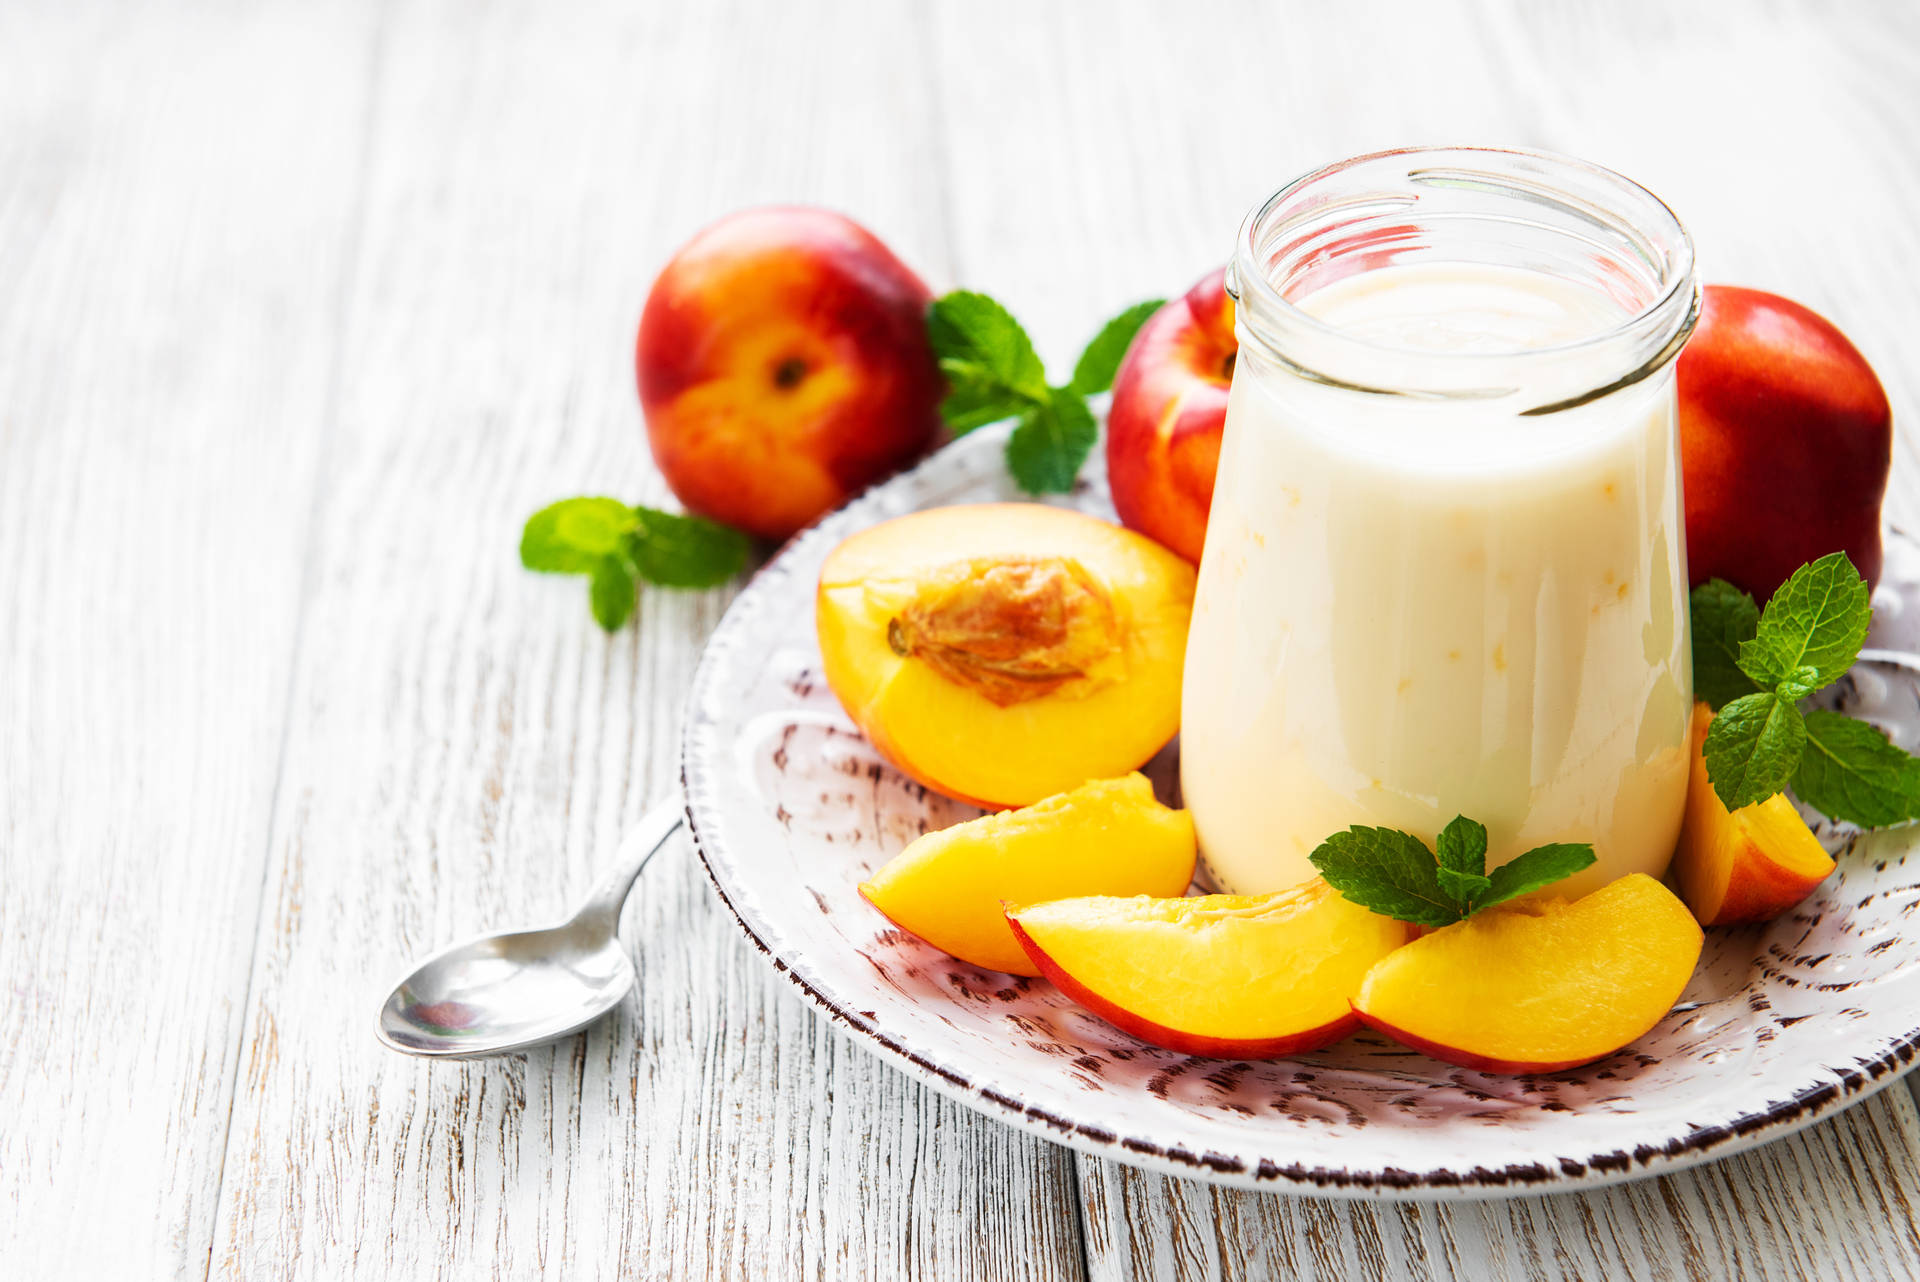 Yogurt With Peach And Apples Wallpaper